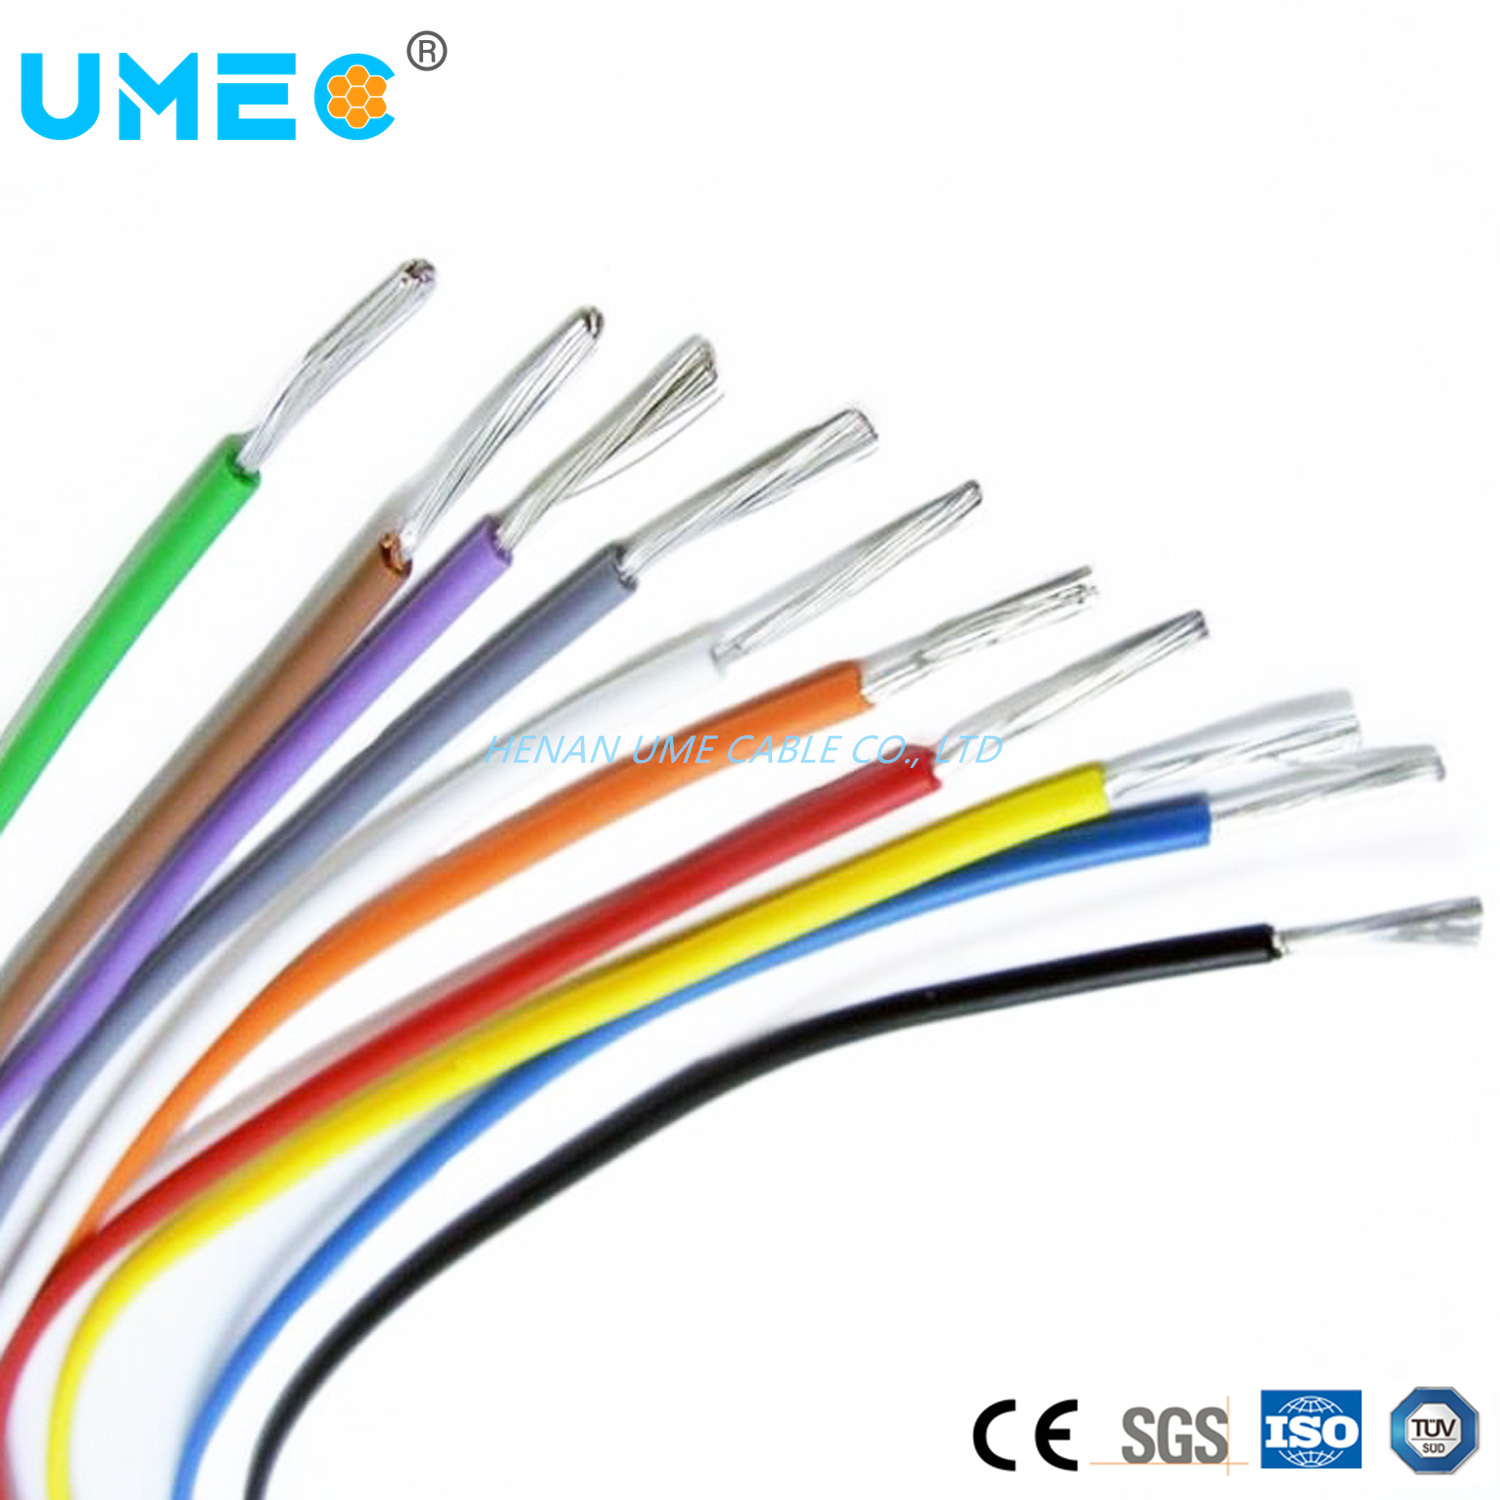 Factory Price Electrical Wire PVC Insulation Blv Multicores Strands Blv Electrical Wire